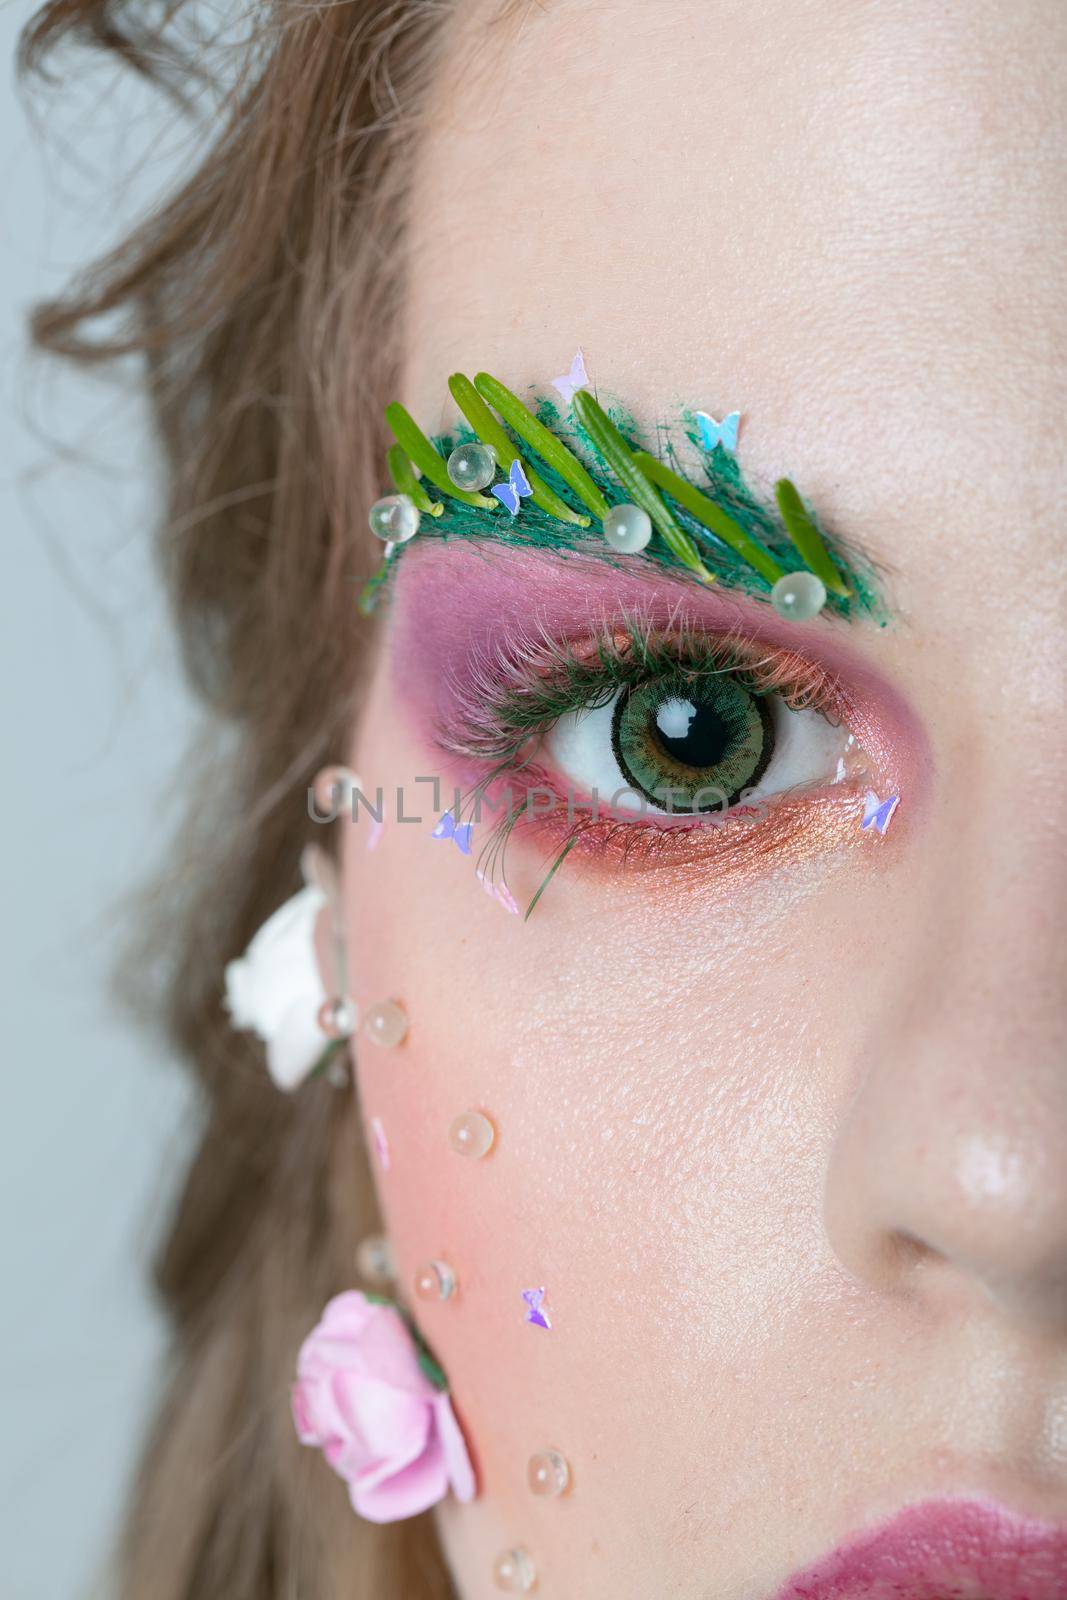 Half of the face of the girl model with extended eyebrows and eyelashes. Part of the face with bright makeup.